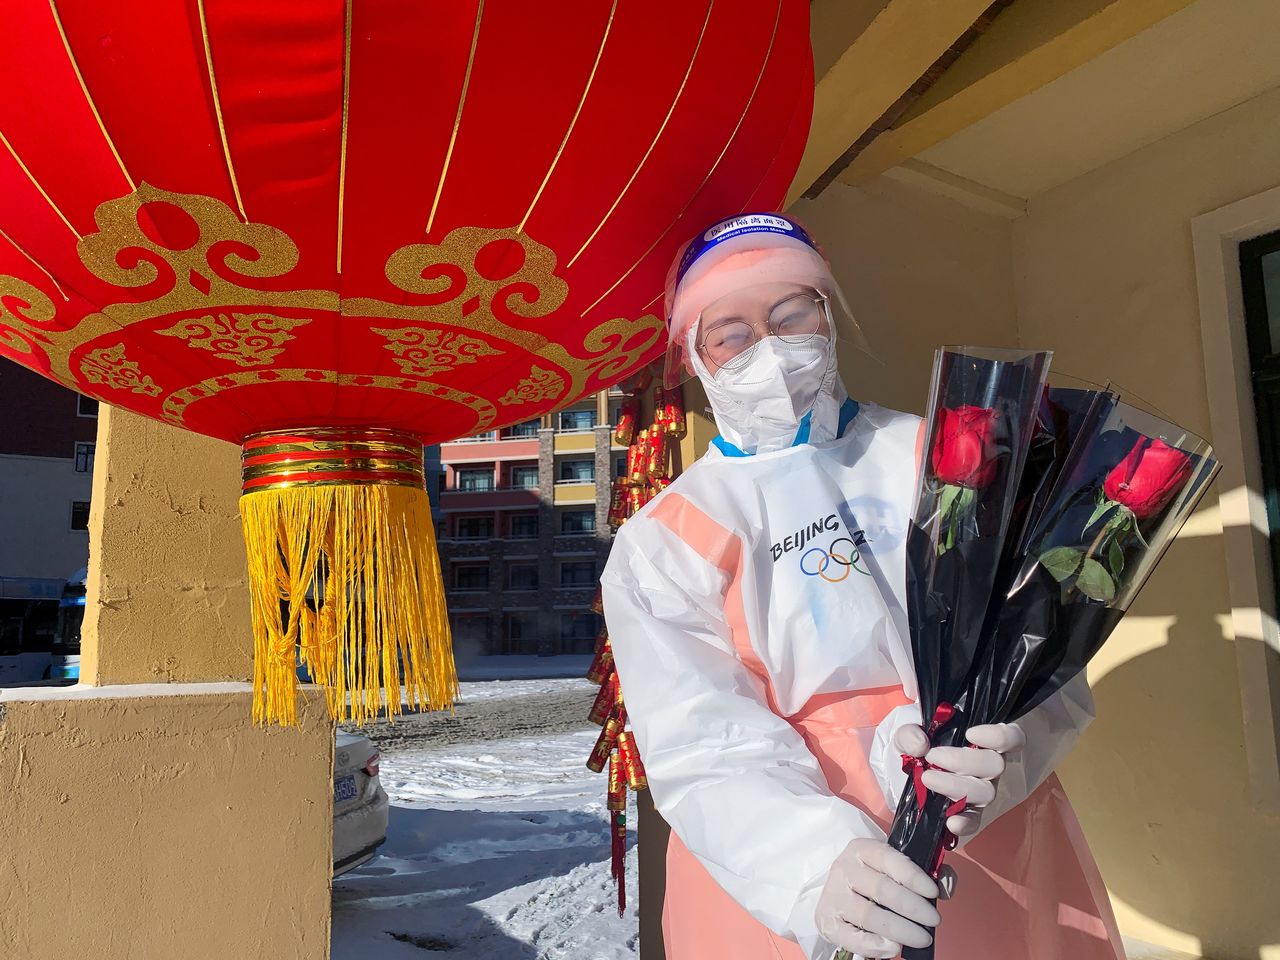 Beijing 2022 Winter Olympics volunteer Stella poses with single red roses as she hands them out to journalists and personnel leaving a 